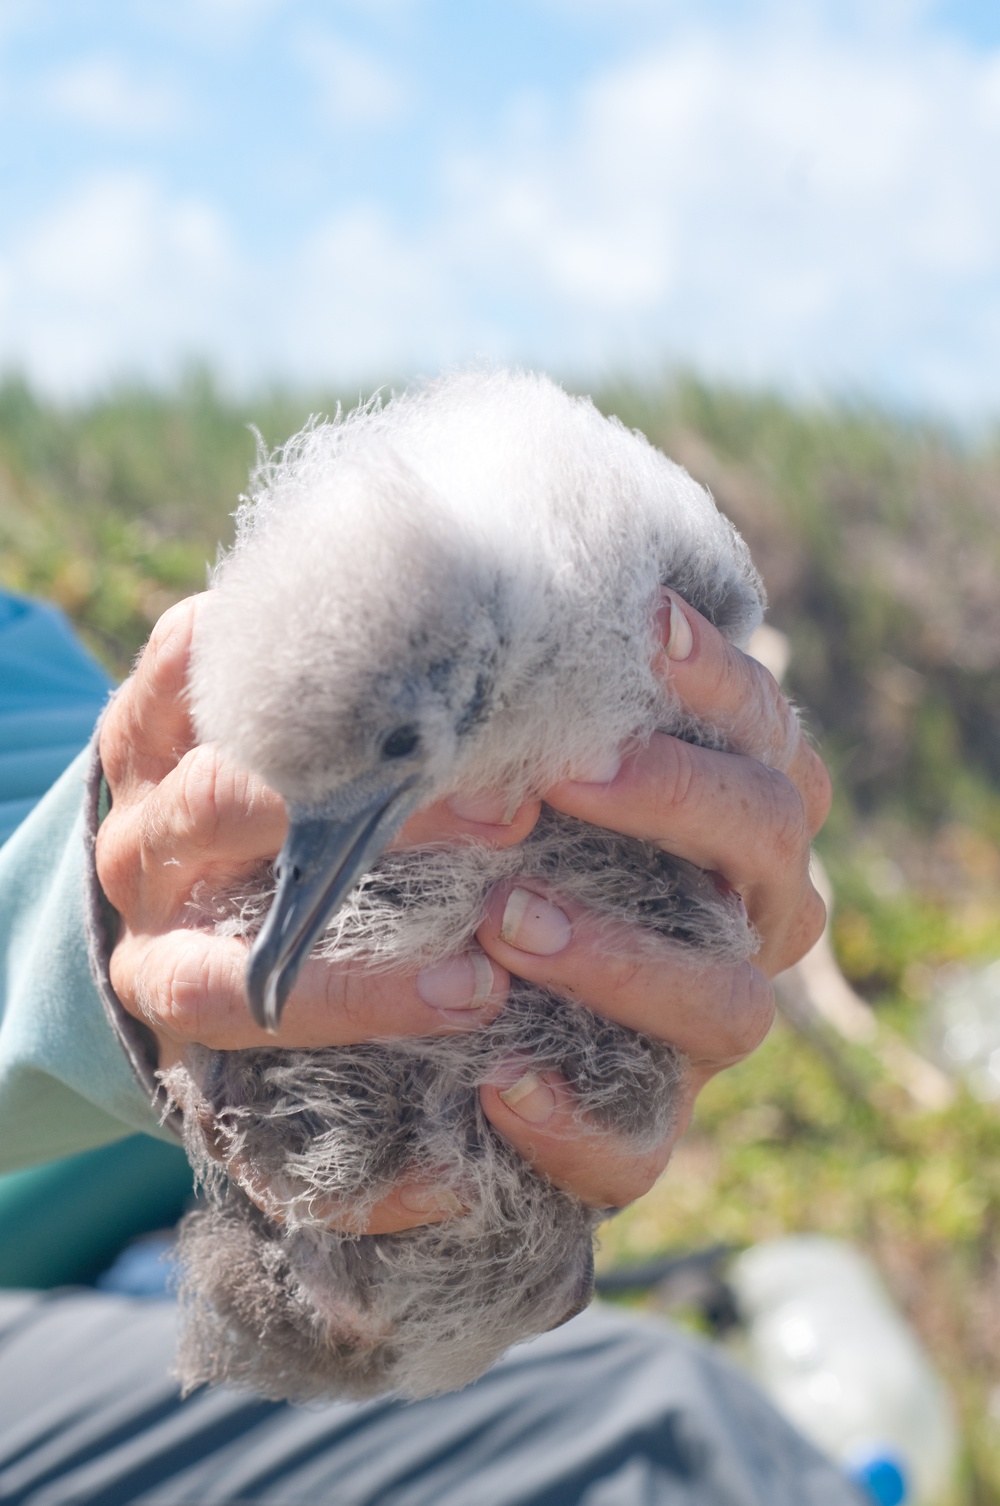 K-Bay protects local shearwater birds